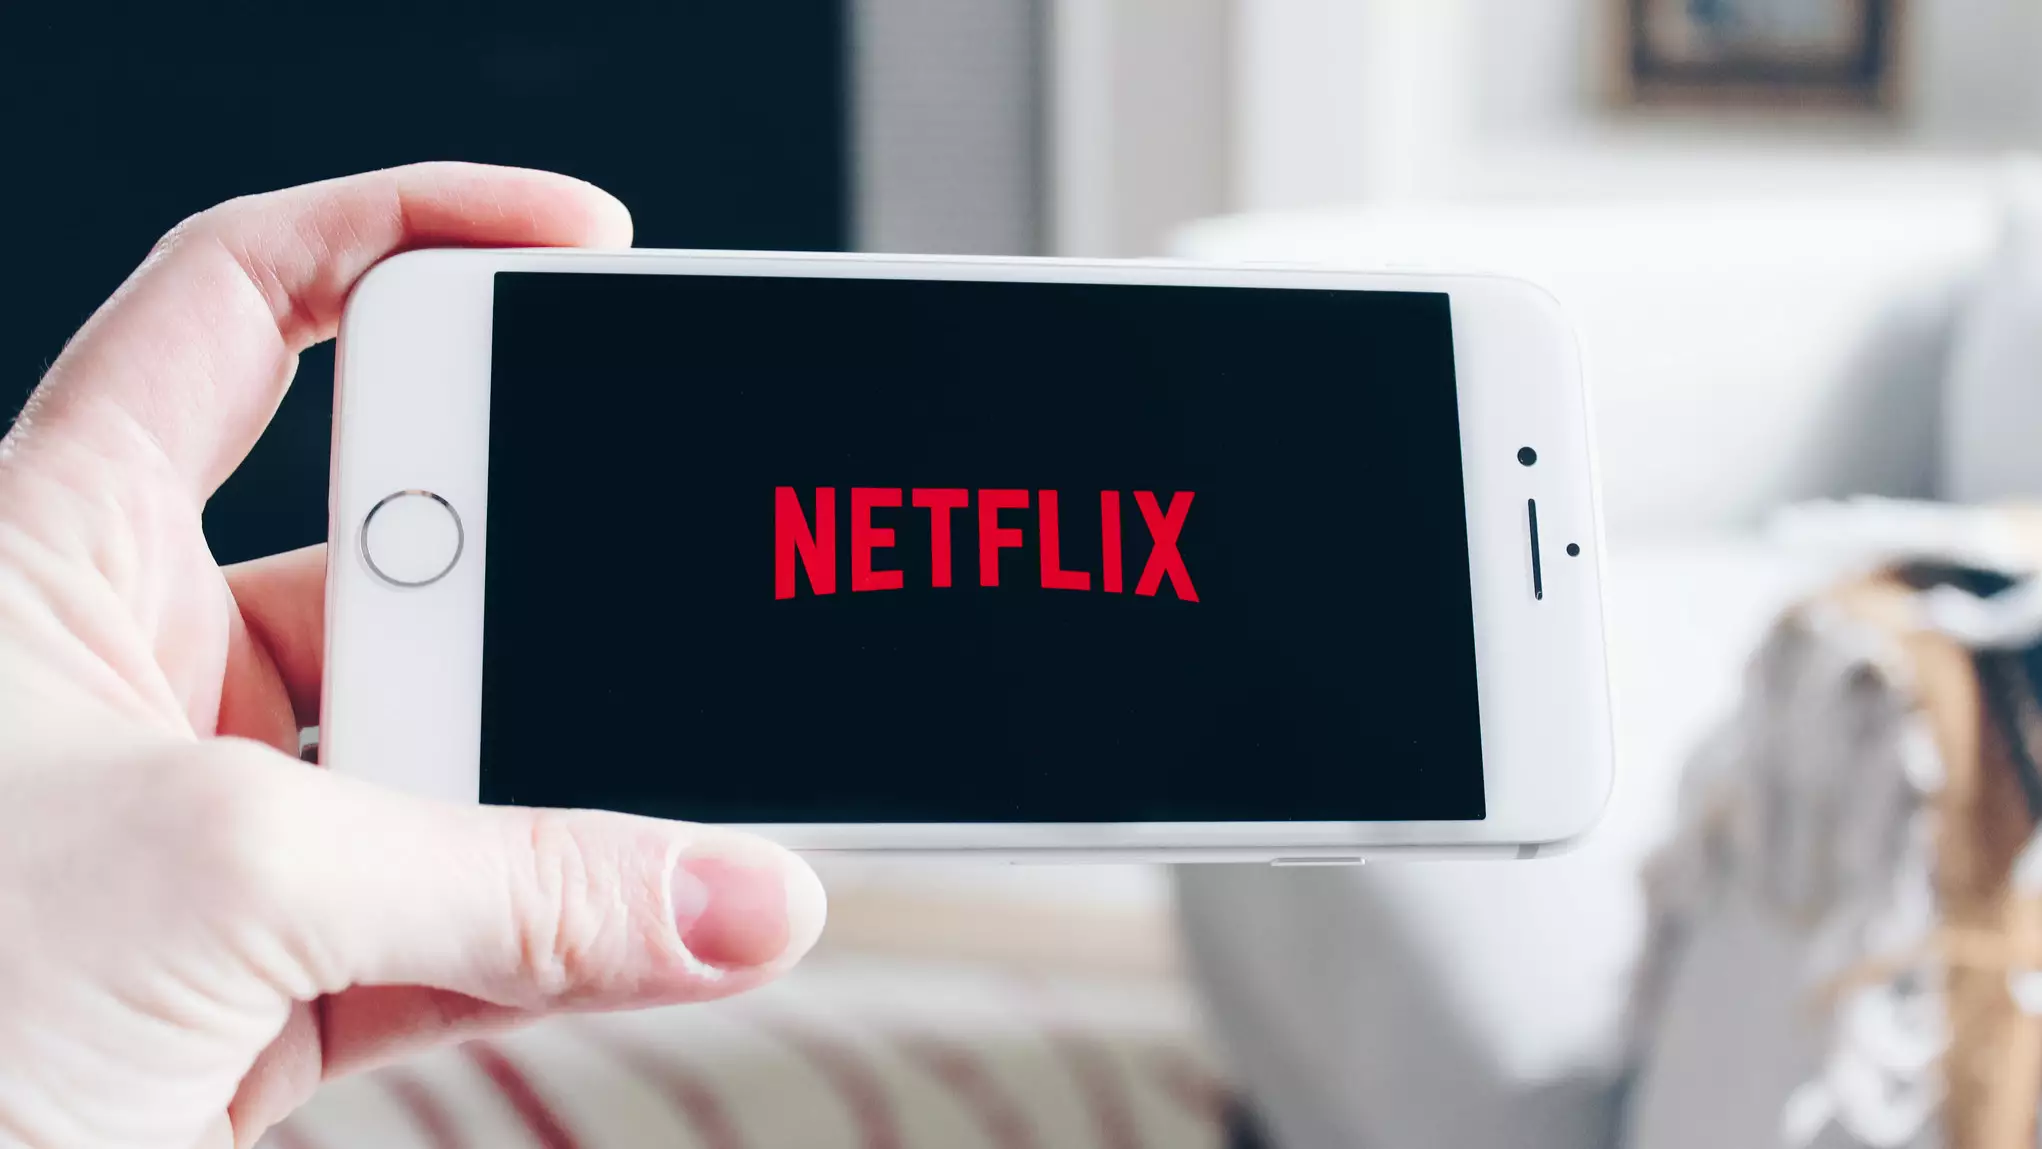 Netflix Finally Gives Users A Way To Browse Shows Without Autoplay Previews